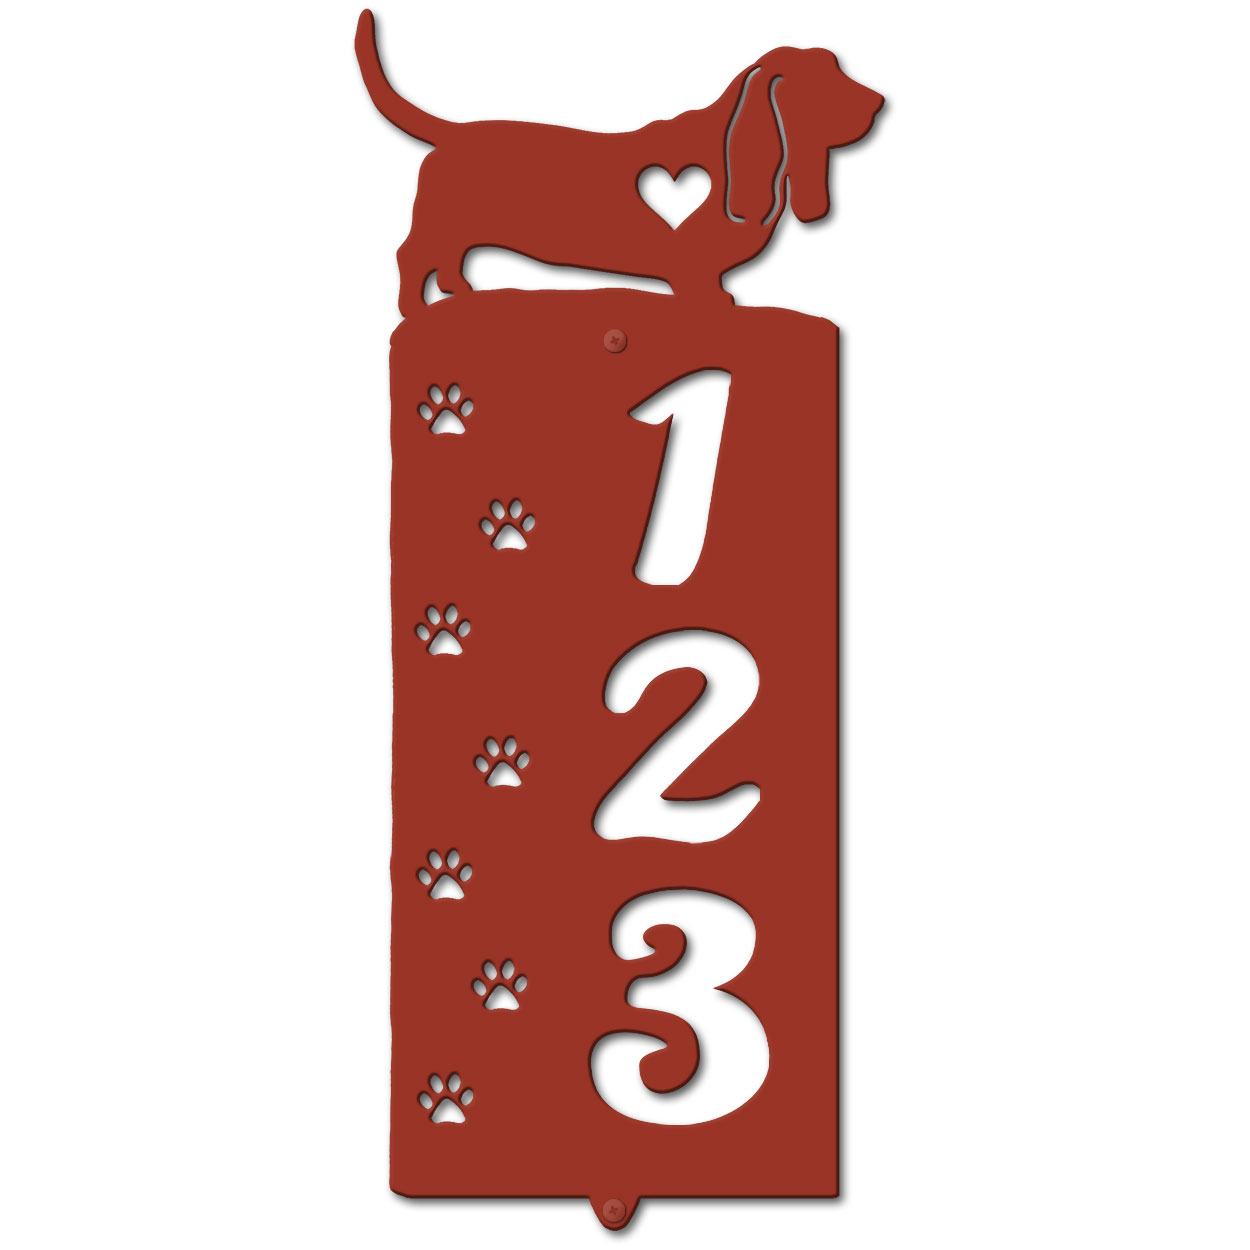 636143 - Basset Hound Cut Outs Three Digit Address Number Plaque